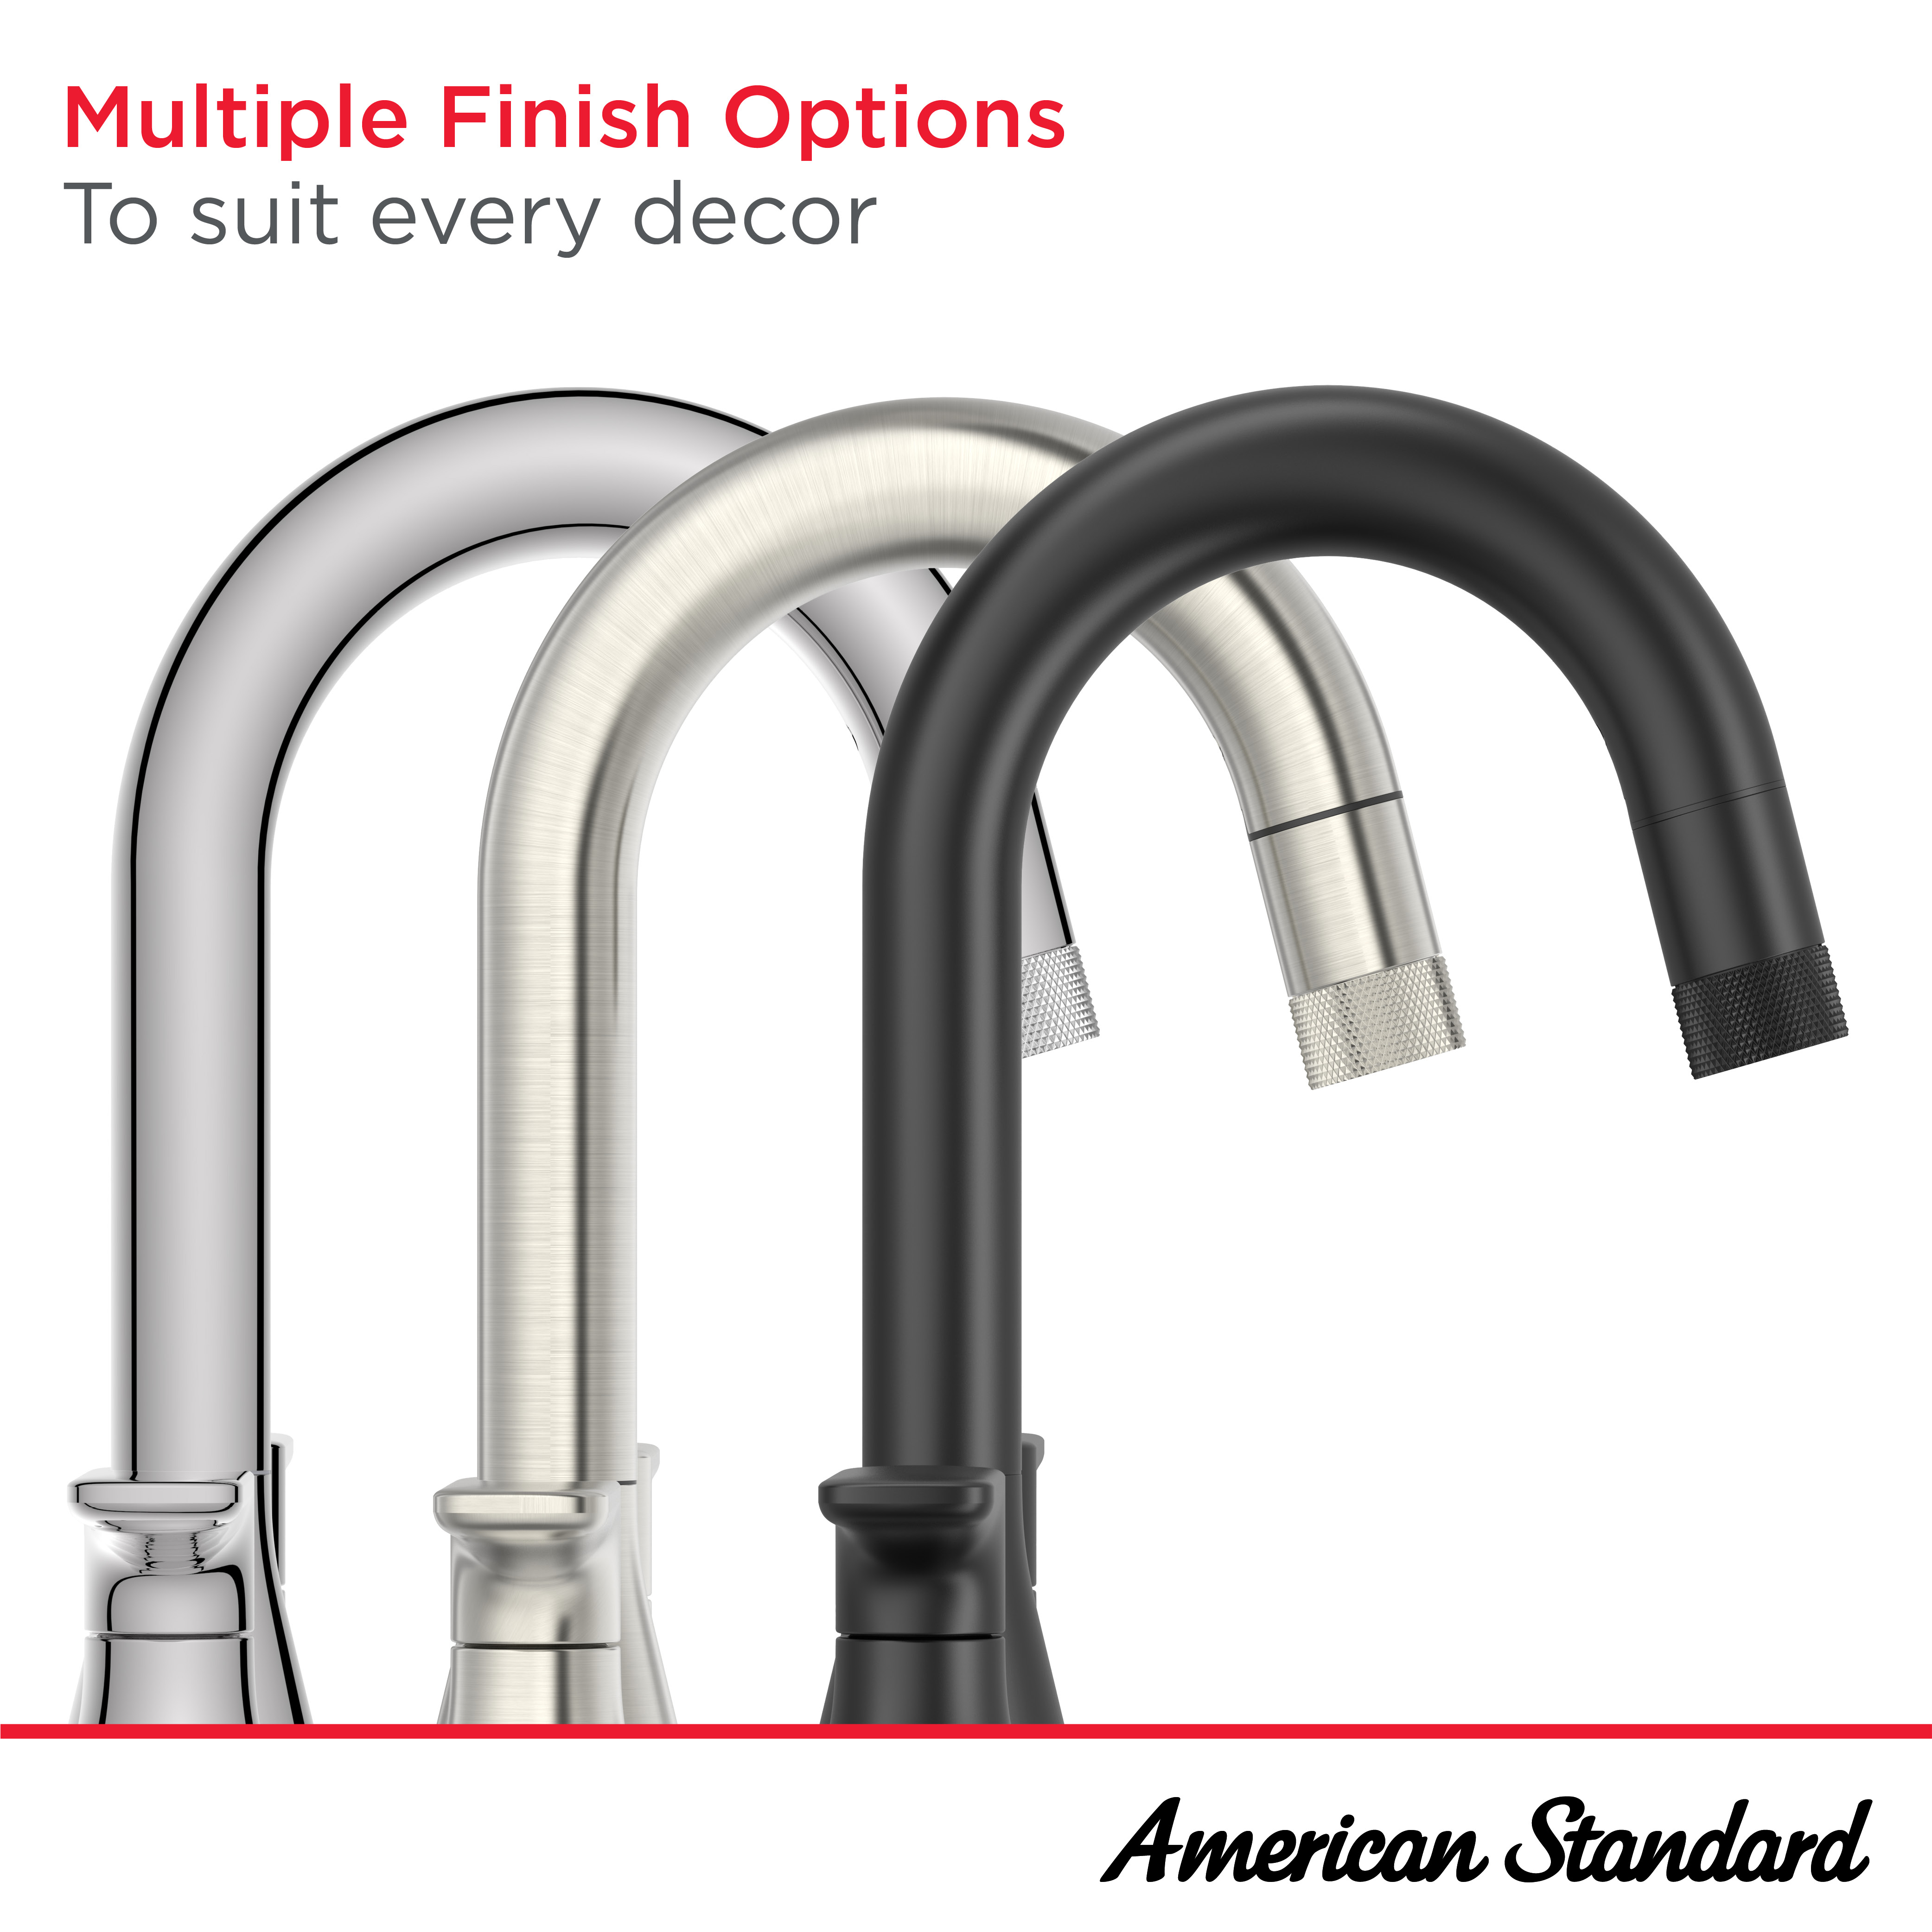 Aspirations™ 8-Inch Widespread 2-Handle Pull-Down Bathroom Faucet 1.2gpm/4.5 L/min With Lever Handles